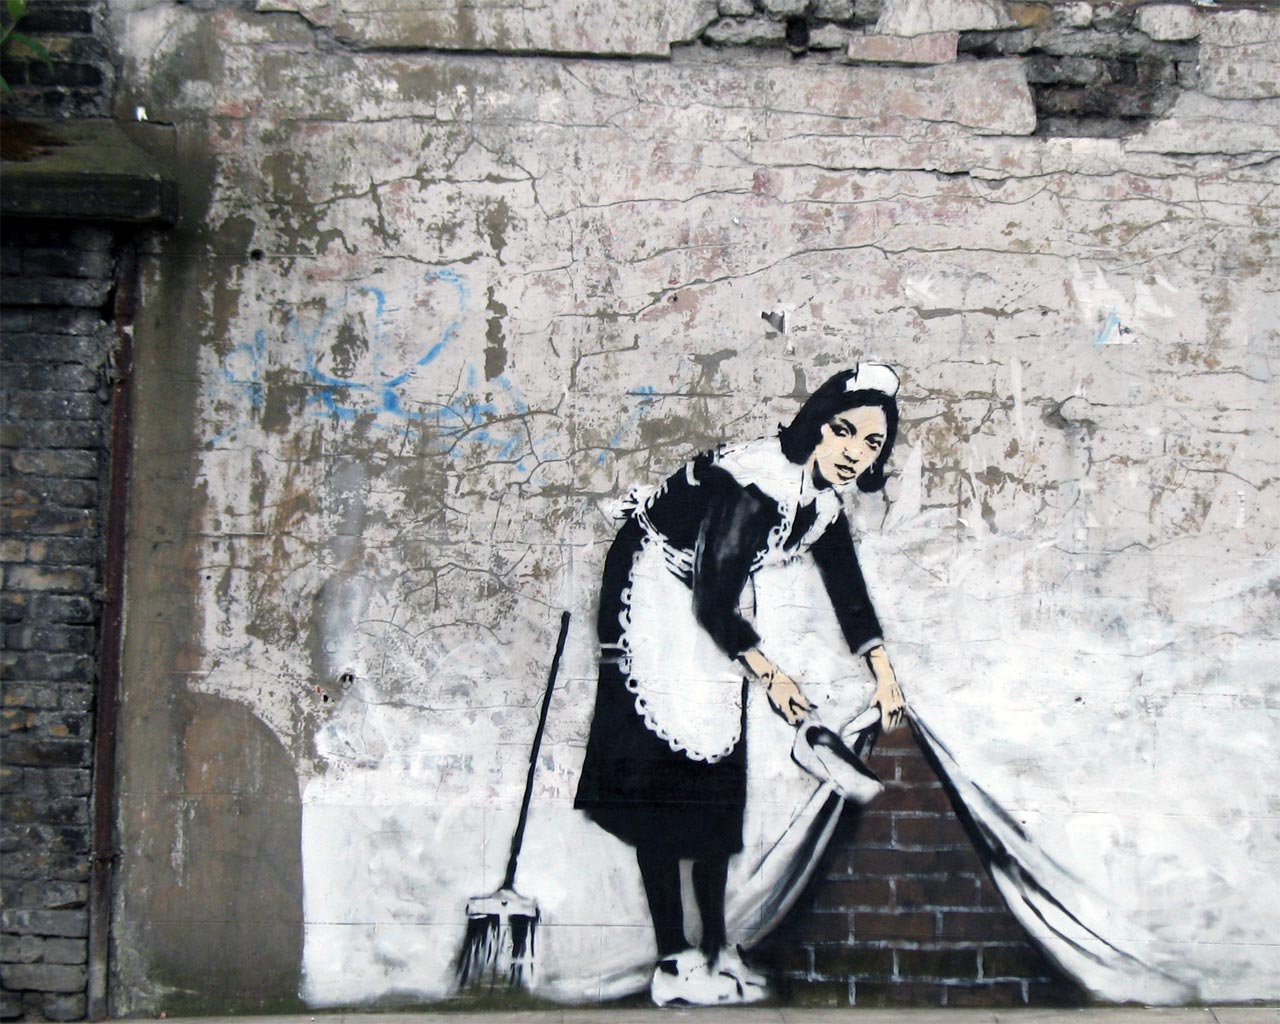 Banksy Maid Wallpaper. Posted by LOLcomics at 8:44 PM · Email This BlogThis!